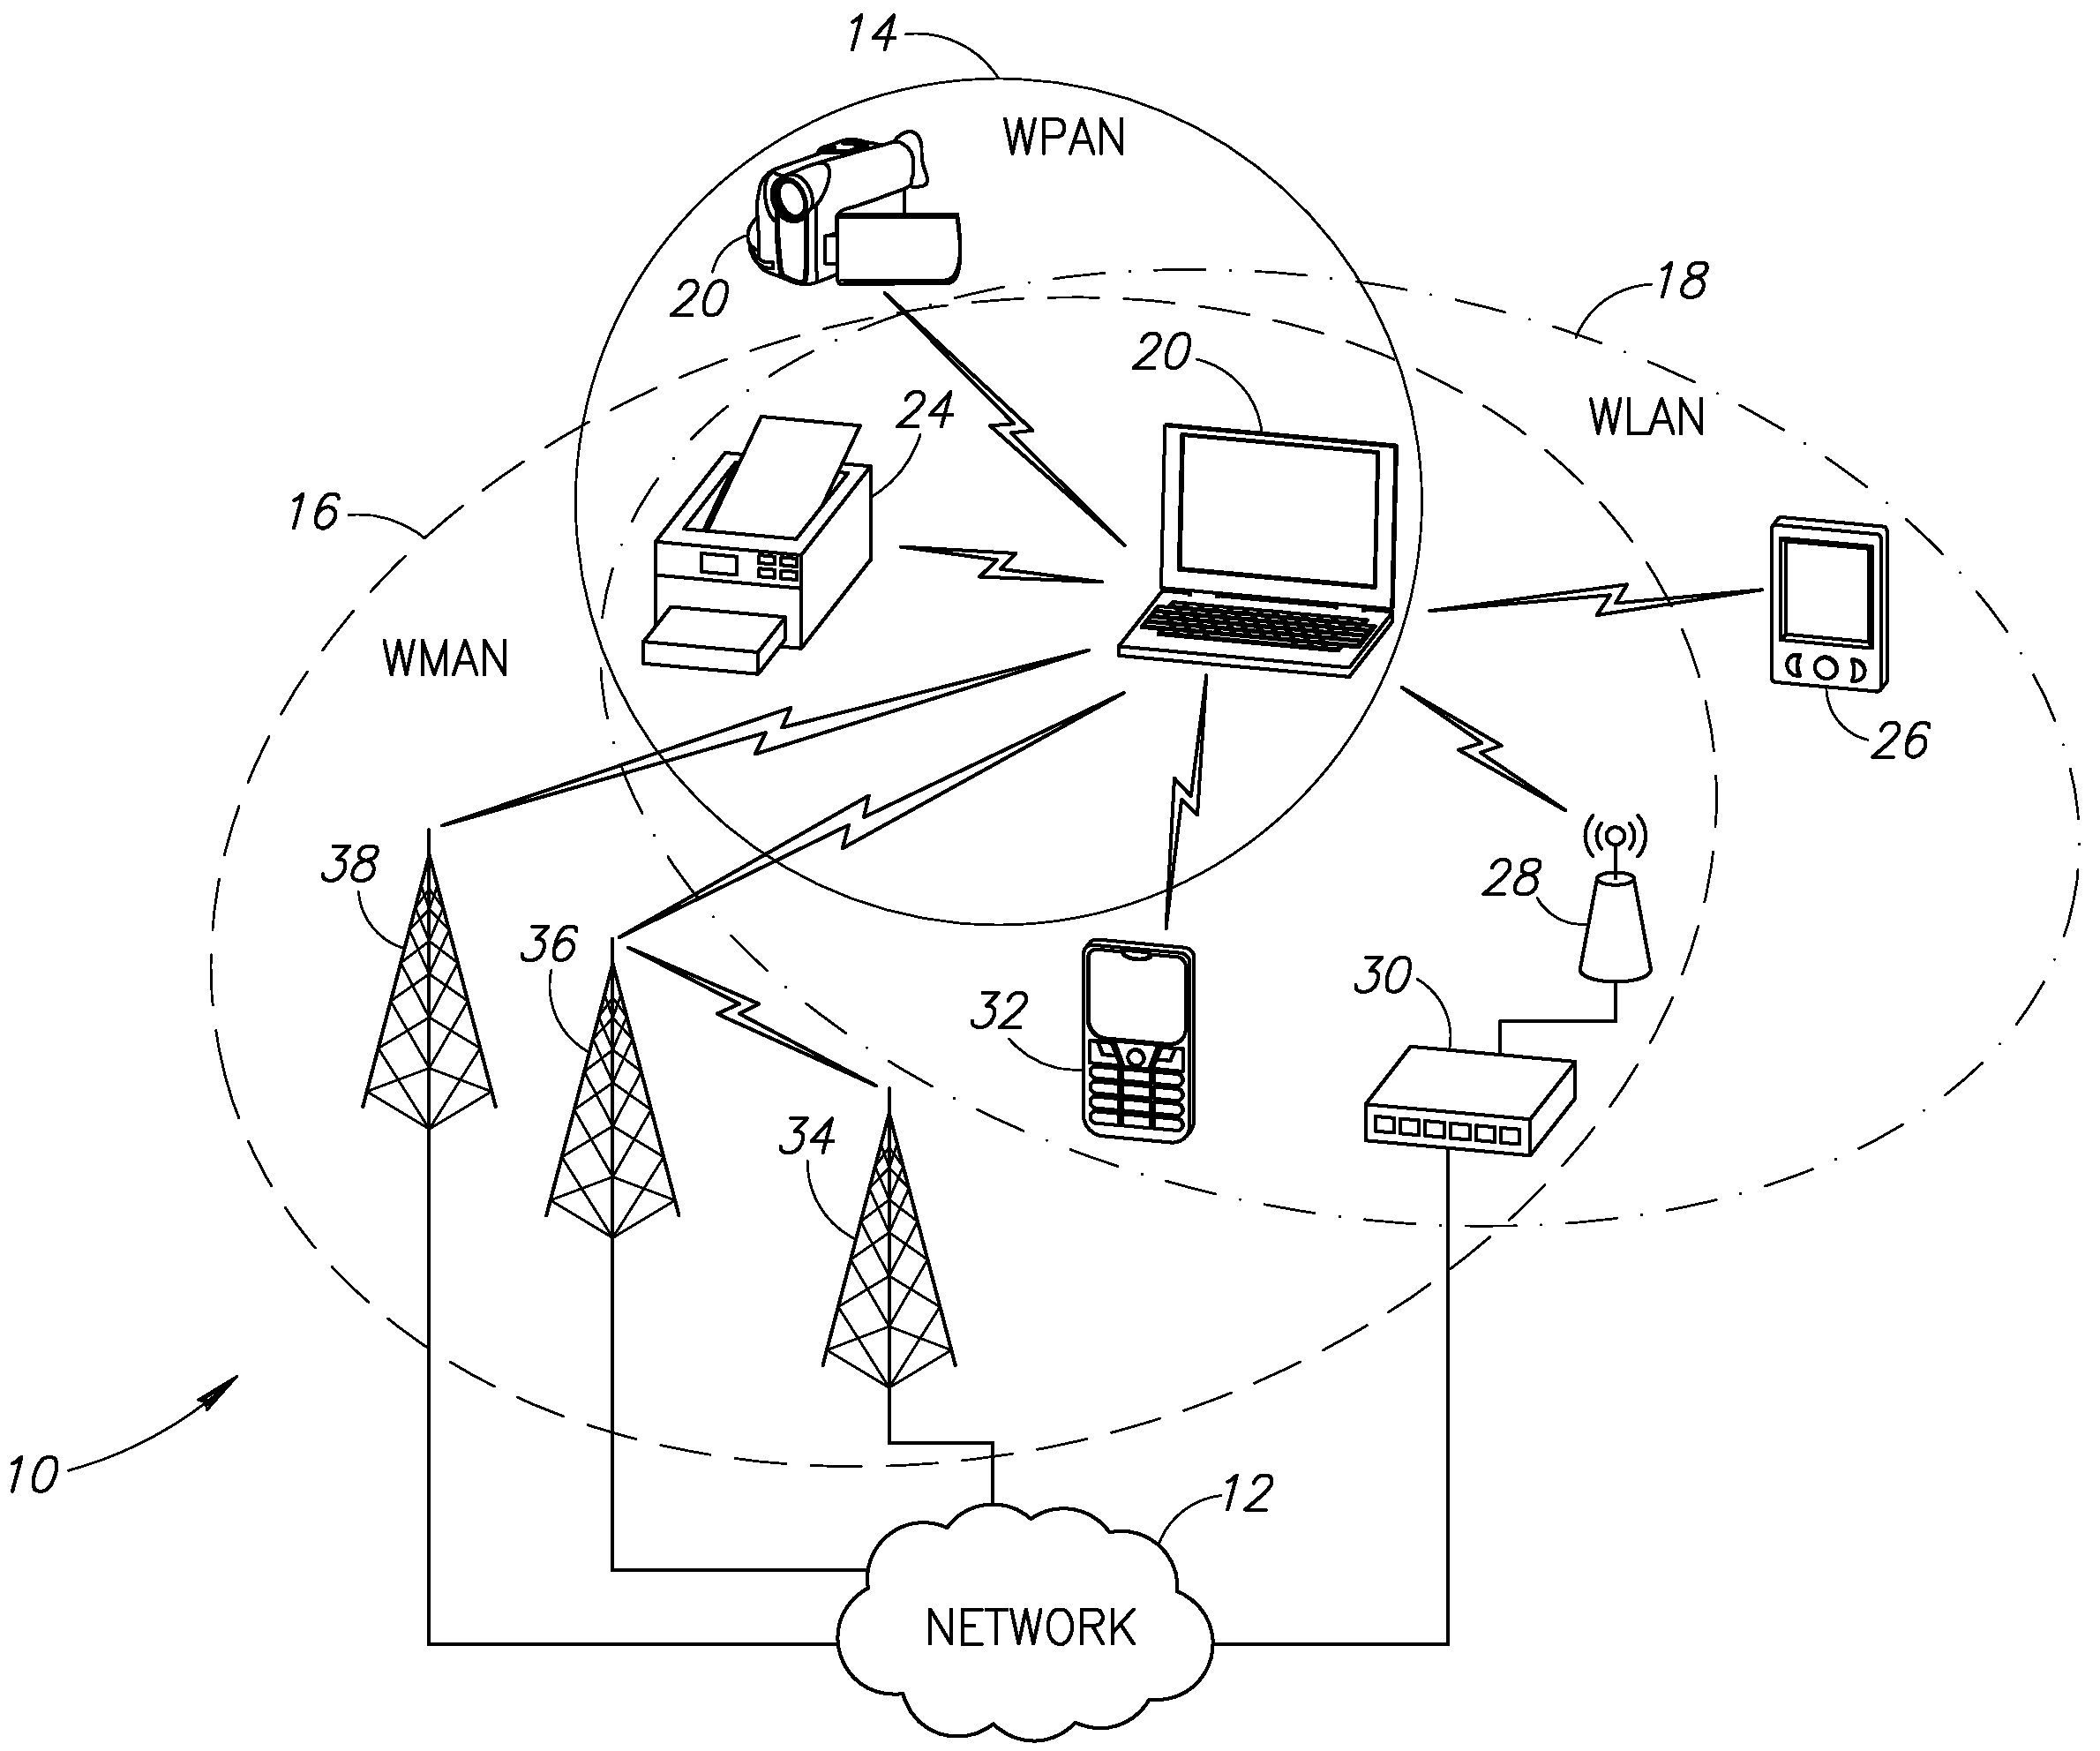 Apparatus for and method of coordinating transmission and reception opportunities in a communications device incorporating multiple radios